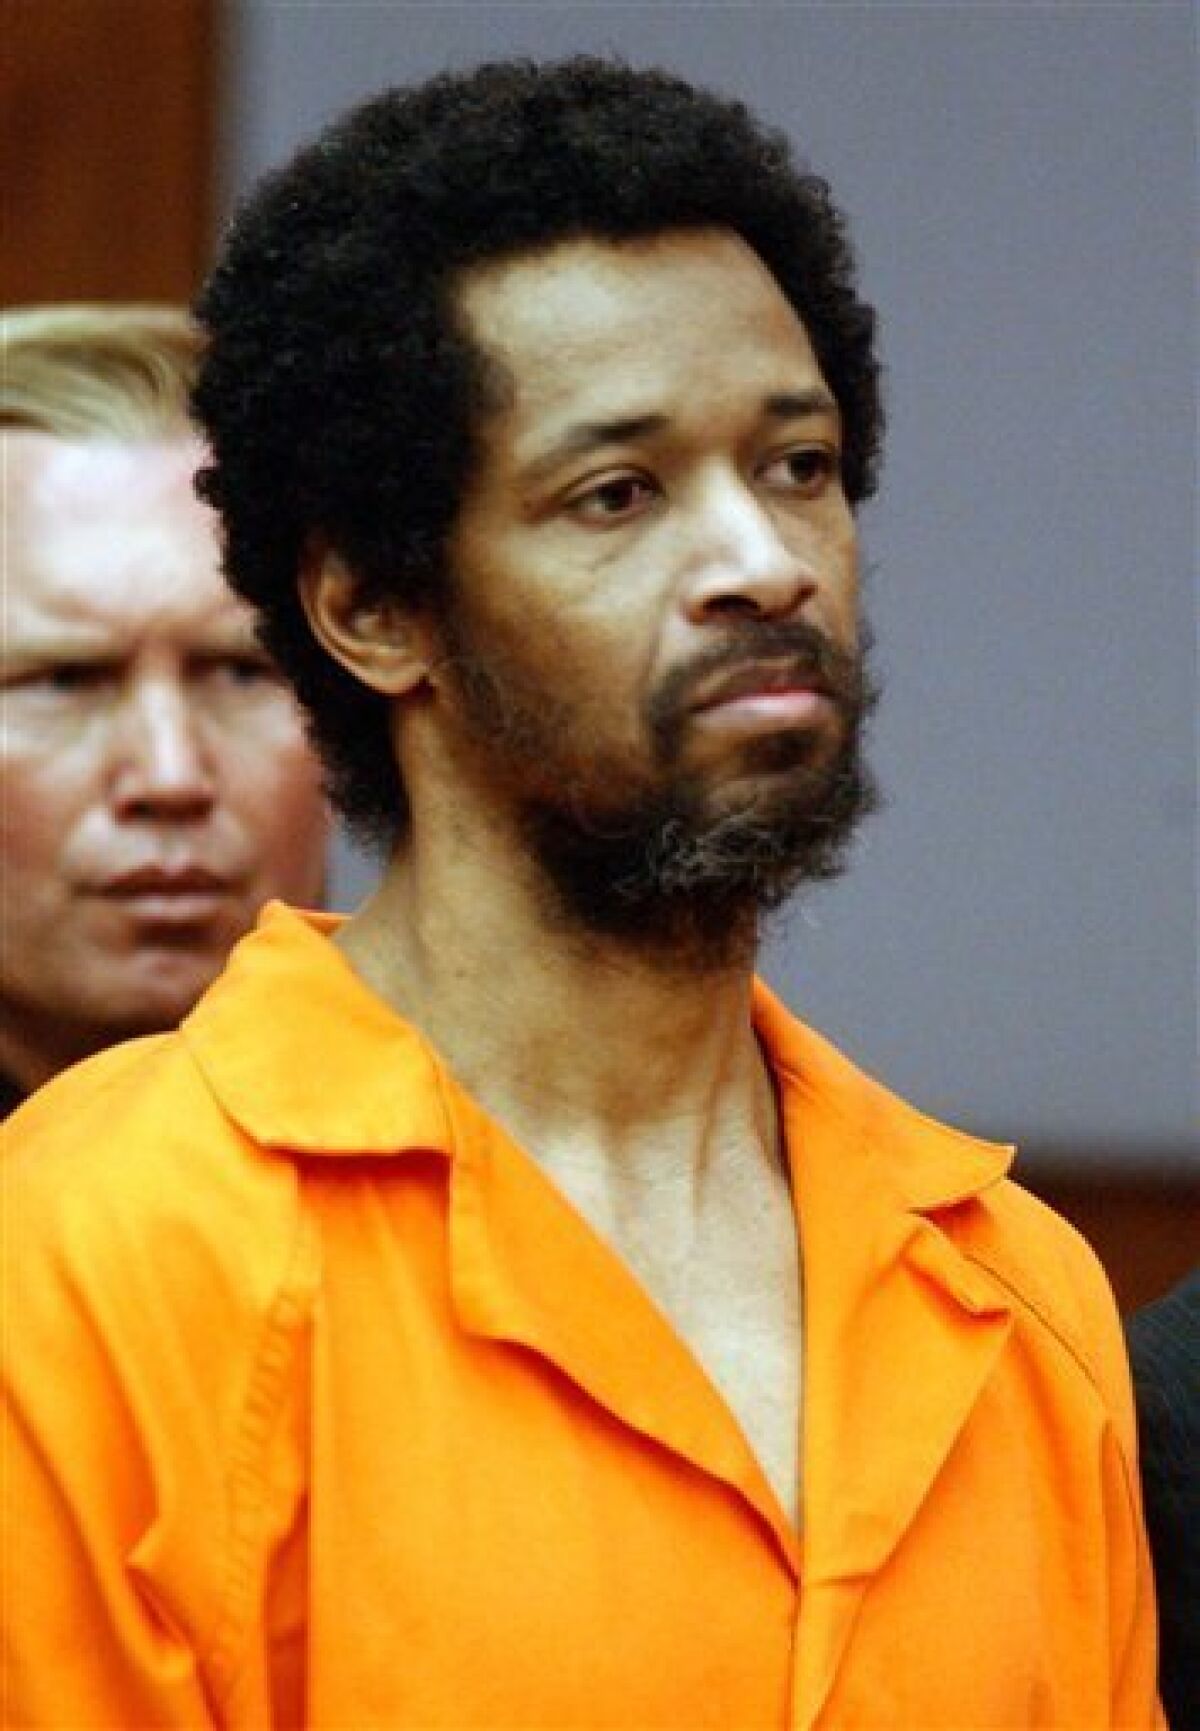 FILE-- In this March 9, 2004 file photo, convicted sniper John Allen Muhammad stands as he is sentenced to death for the shooting of Dean Meyers at the Prince William County Circuit Court in Manassas, Va. An appeal of his conviction will be heard in the Virginia 4th Circuit of Appeals in Richmond this week. (AP Photo/Steve Helber, File)